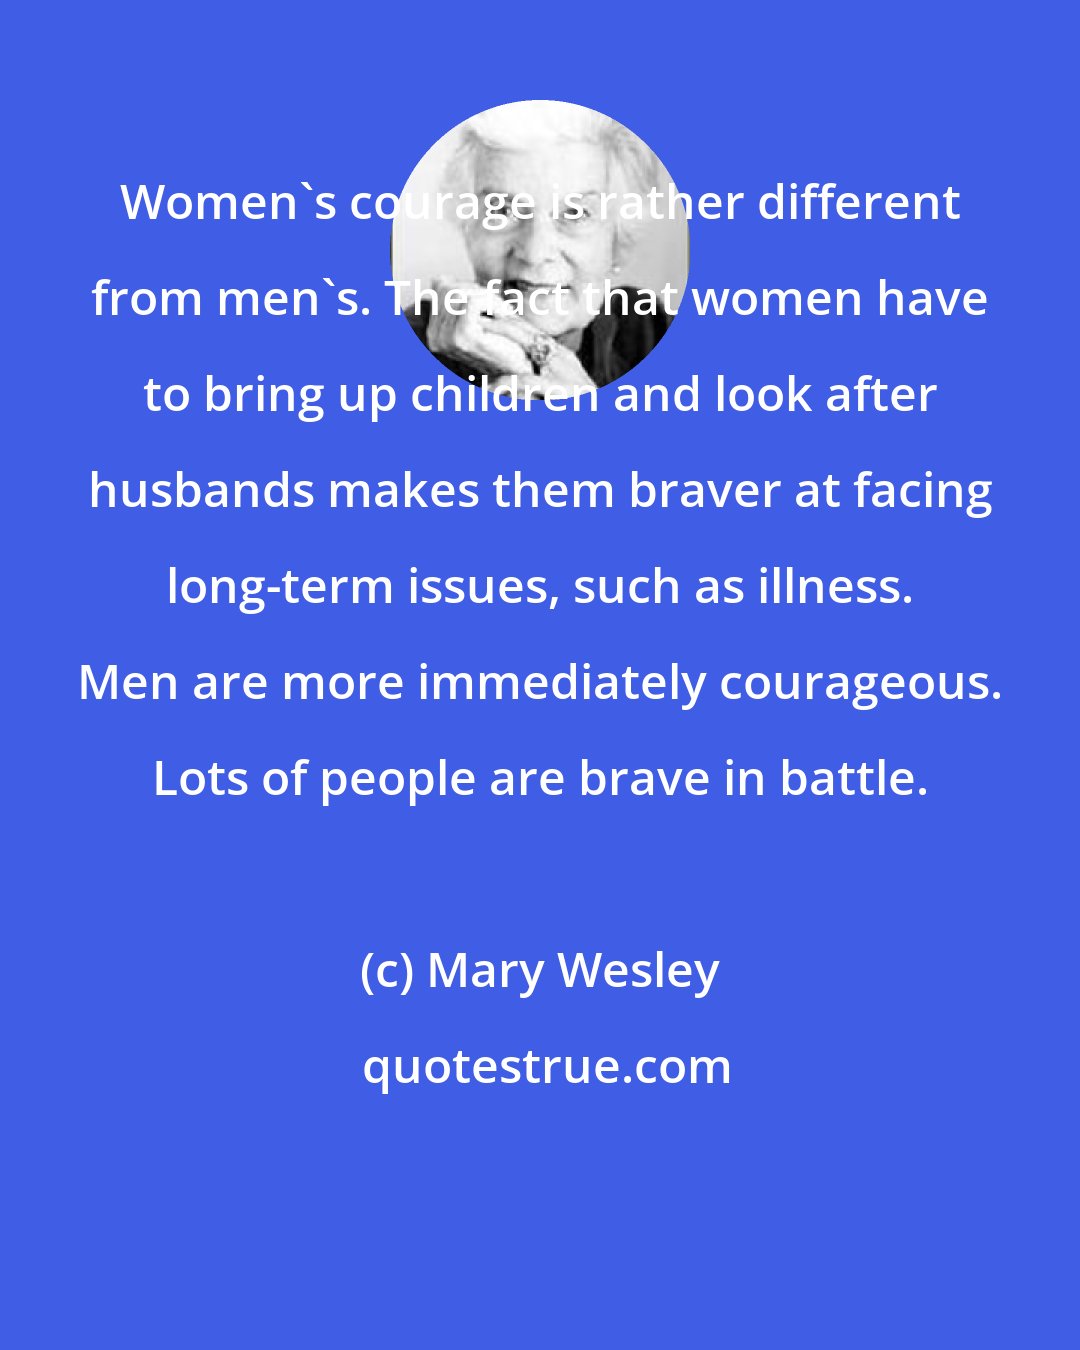 Mary Wesley: Women's courage is rather different from men's. The fact that women have to bring up children and look after husbands makes them braver at facing long-term issues, such as illness. Men are more immediately courageous. Lots of people are brave in battle.